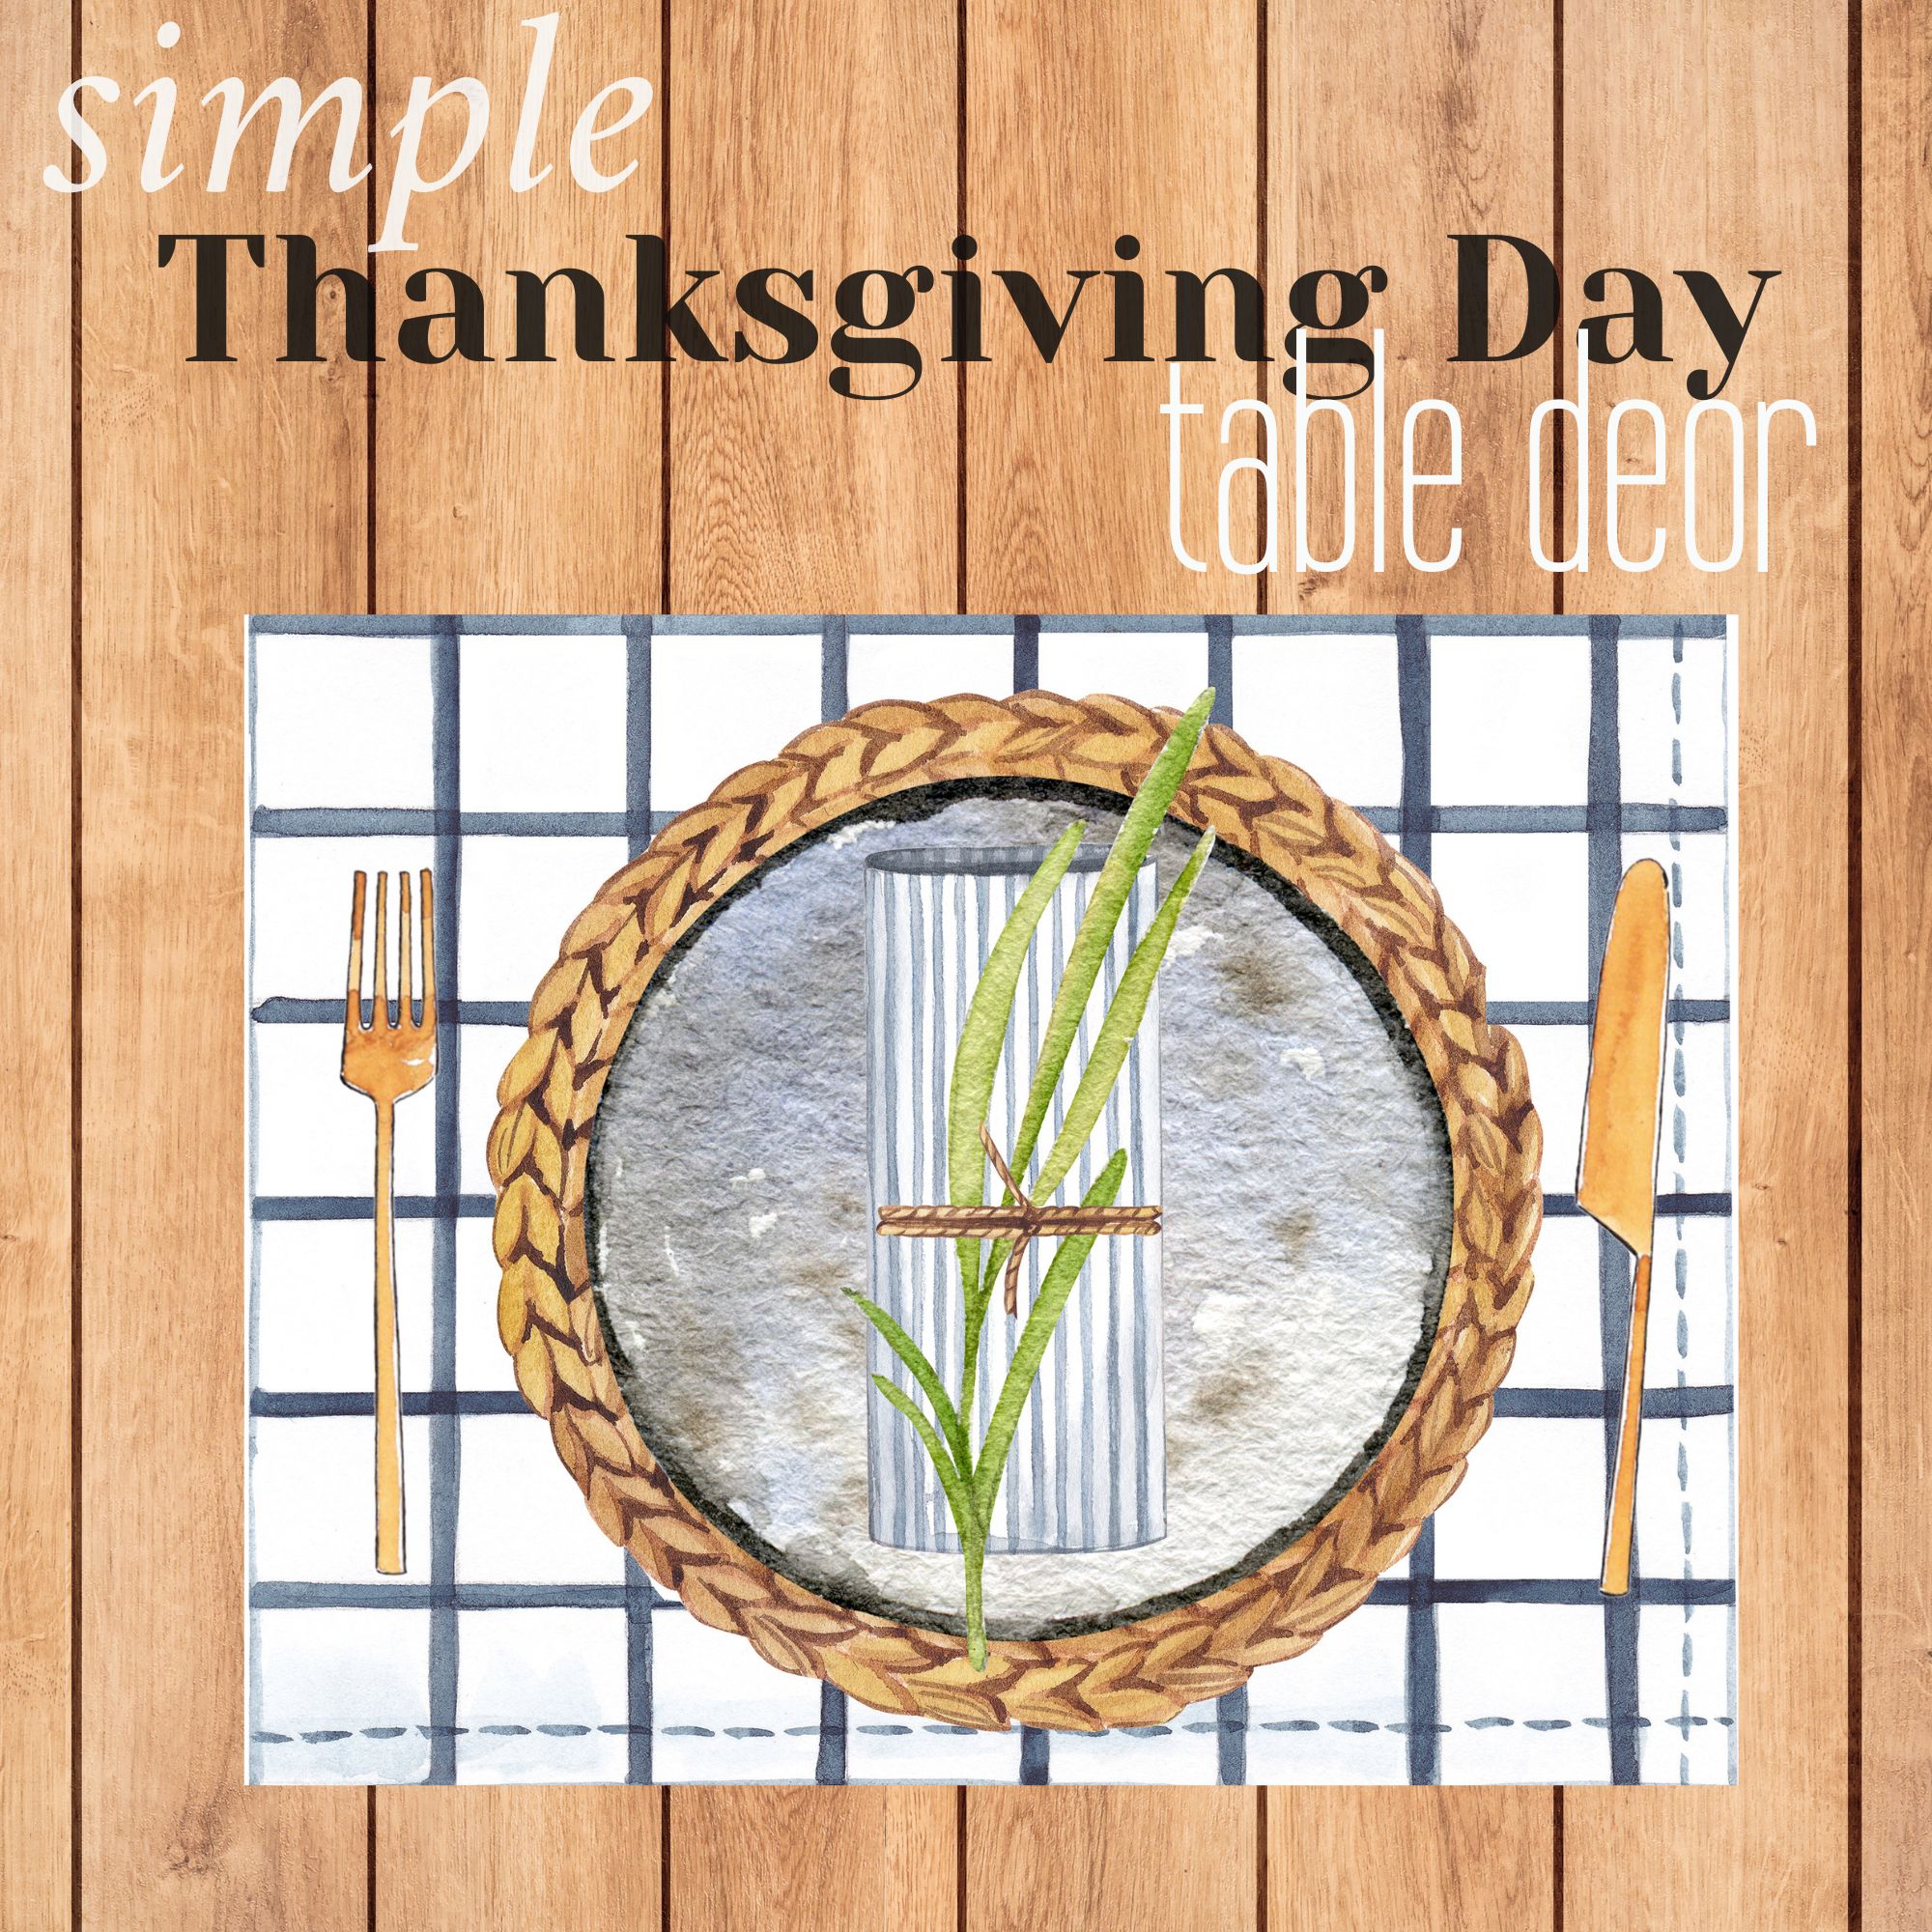 Simple “Thanksgiving Day” Table Decor Ideas